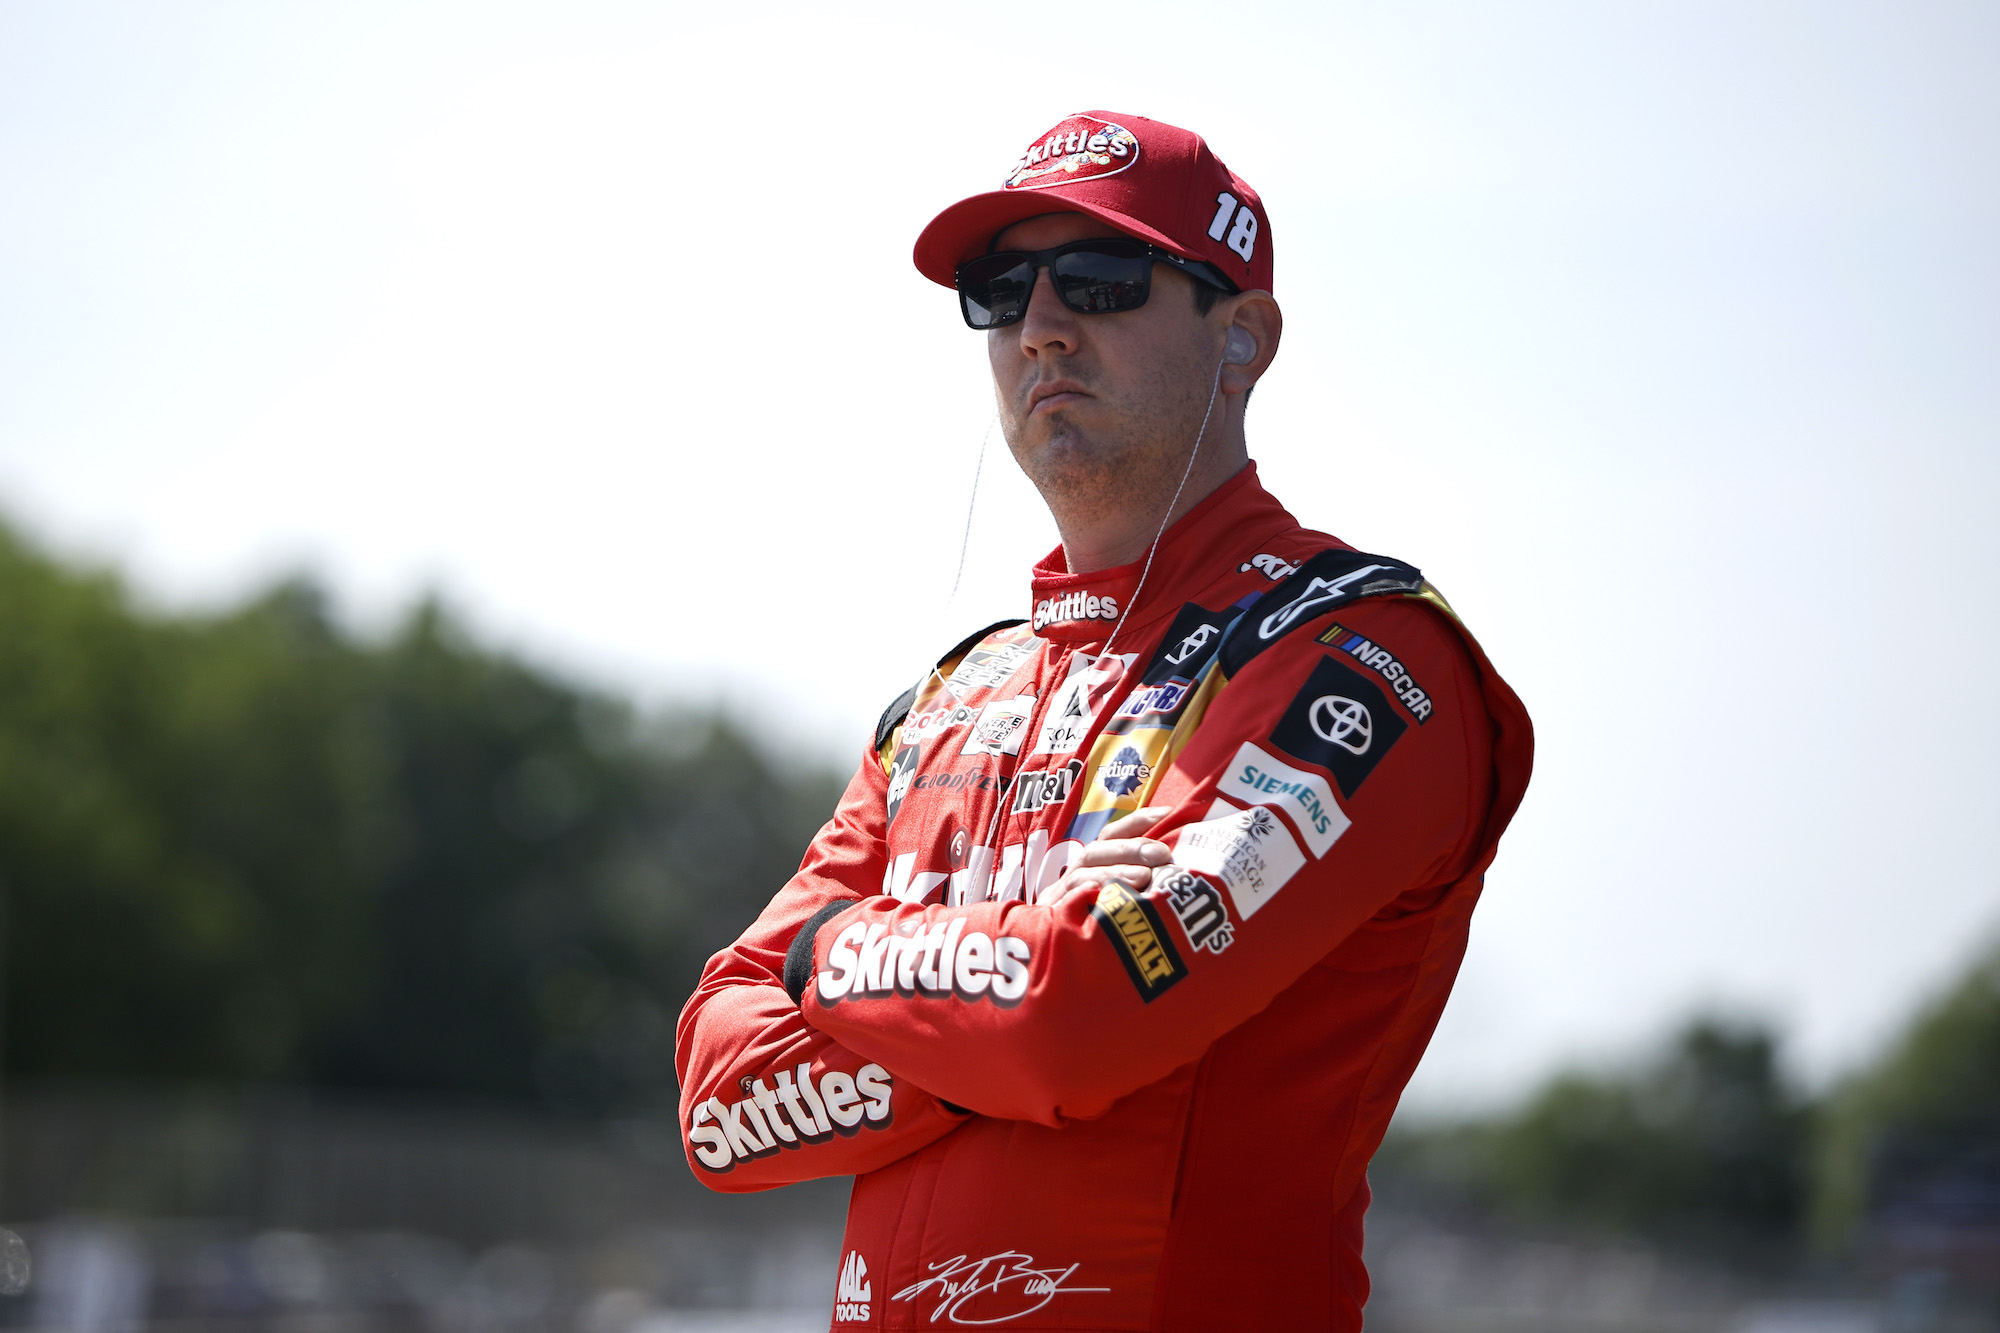 Kyle Busch Opens up and Candidly Admits Free Agency Has Taken a Toll on Him: ‘It’s Been Hard as Hell and a Lot of Sleepless Nights’